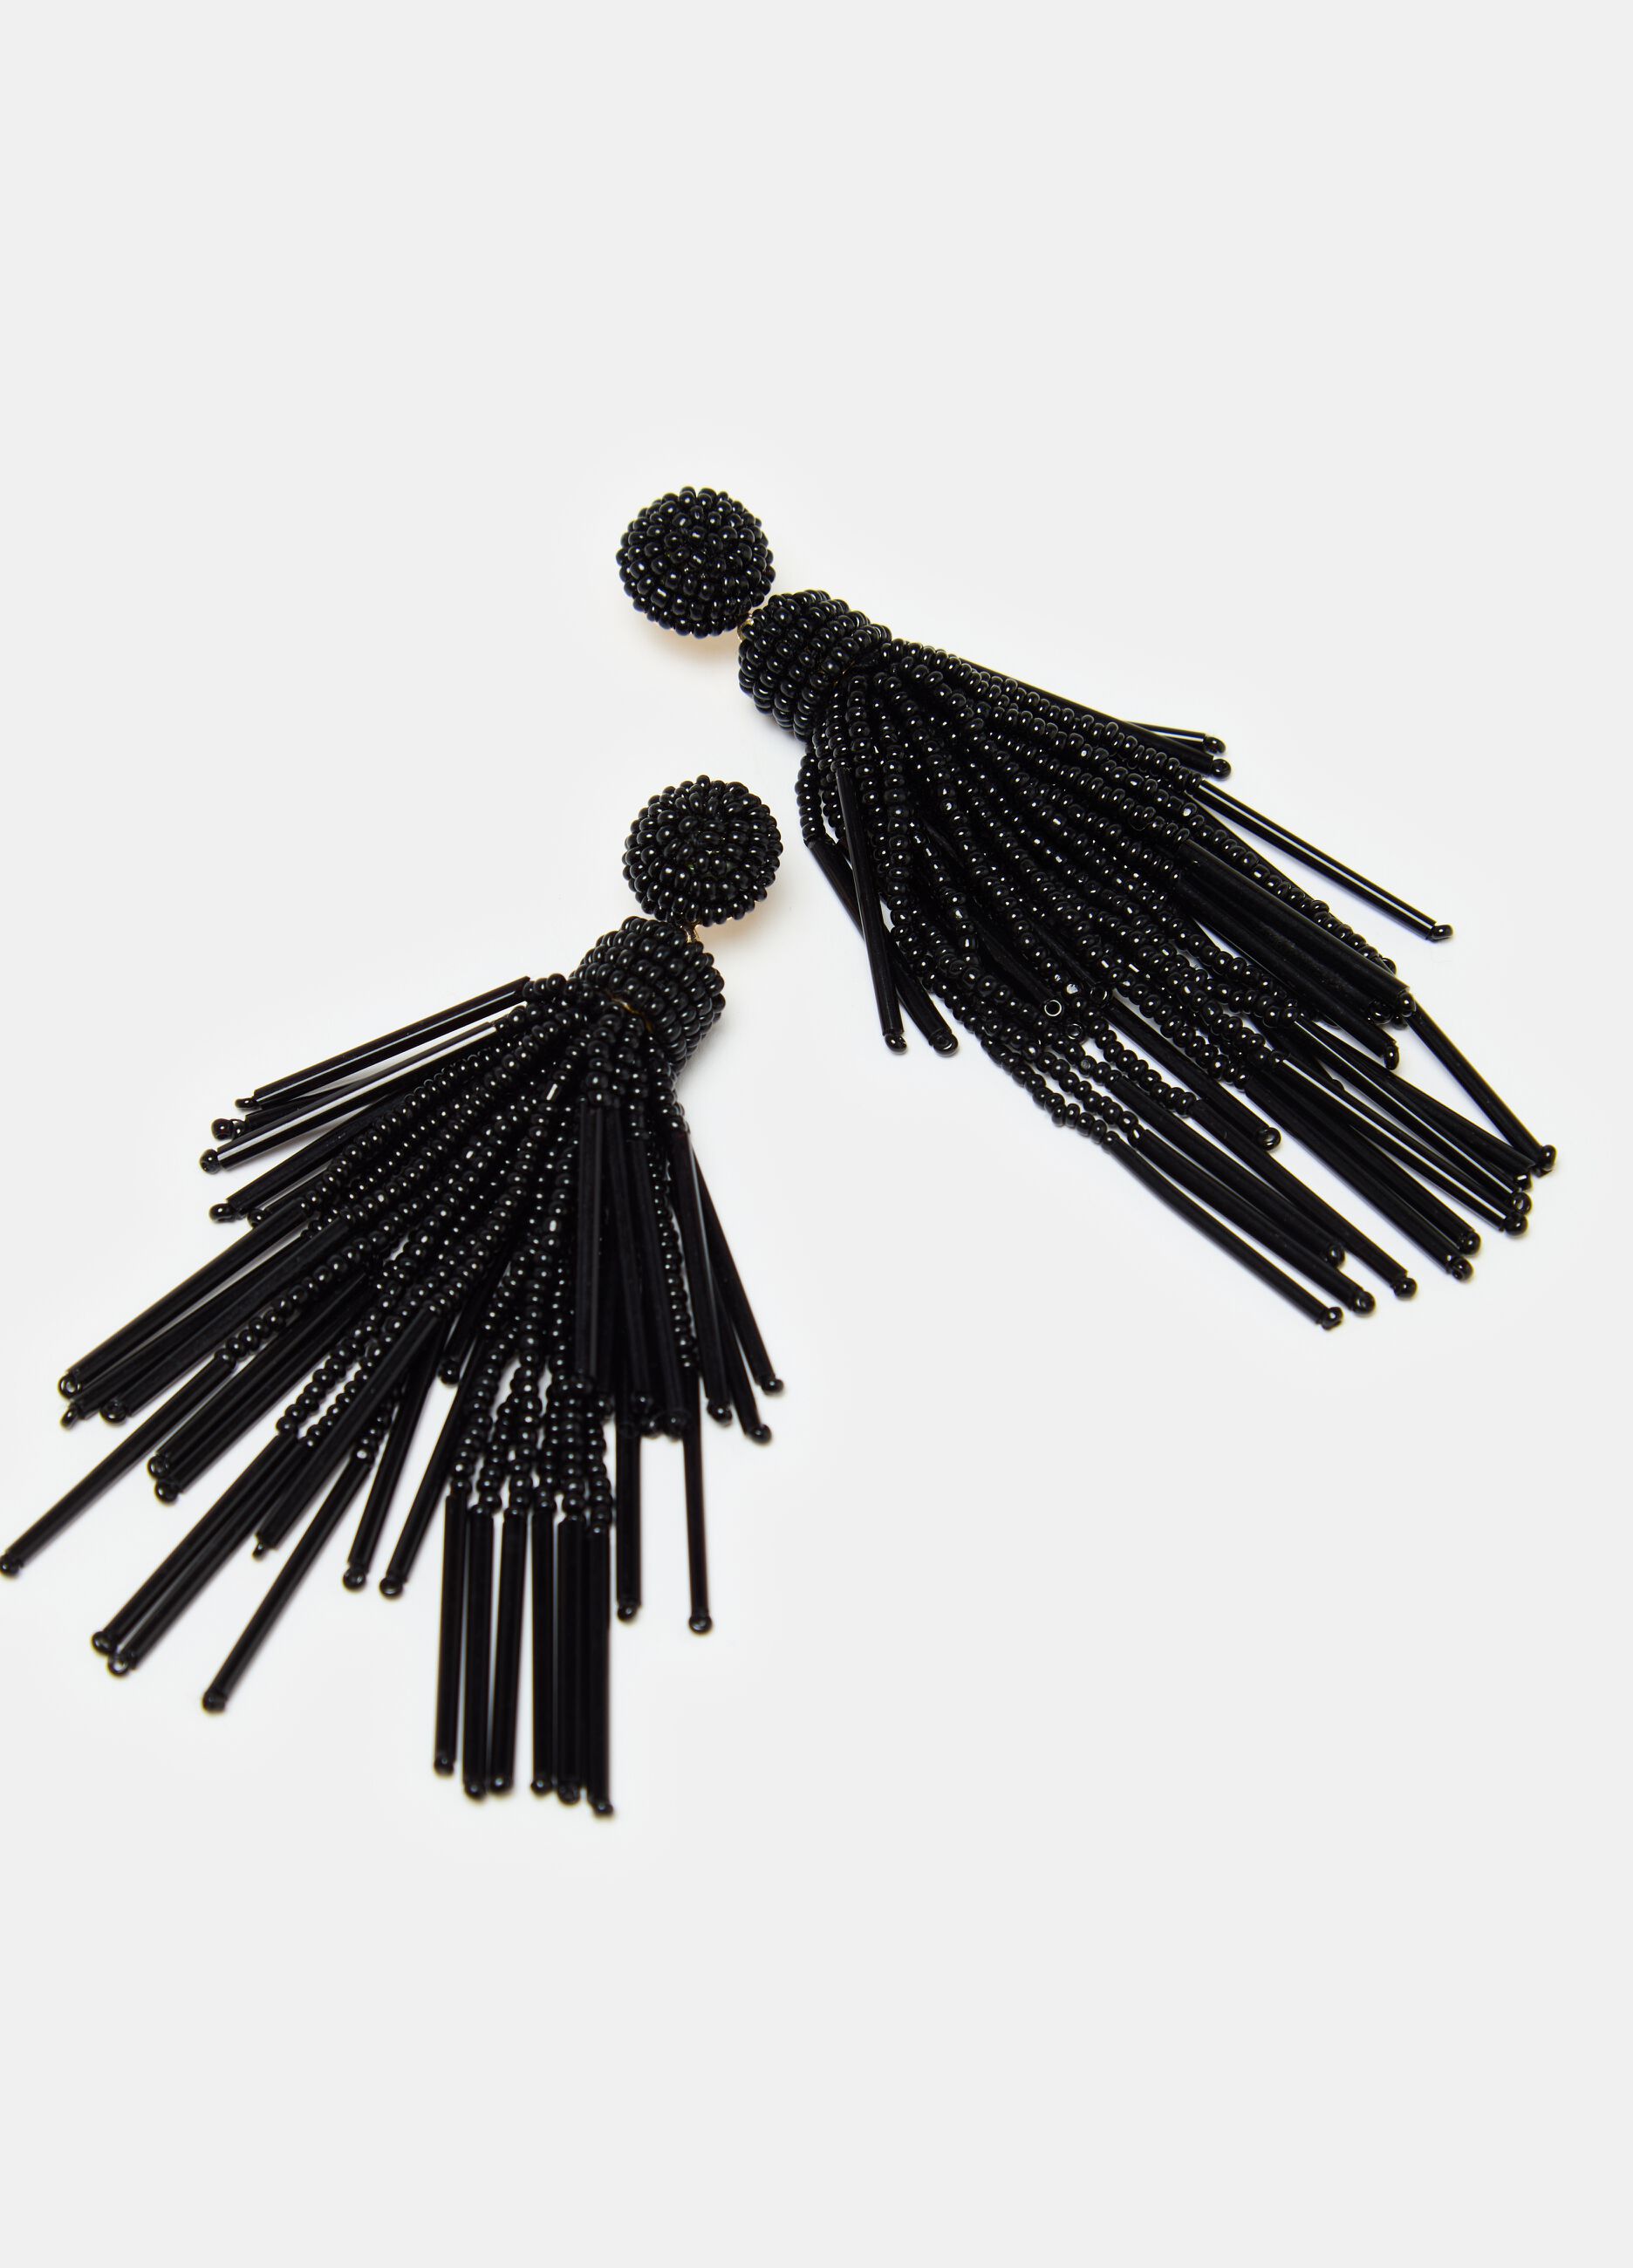 Pendant earrings with beads and fringing